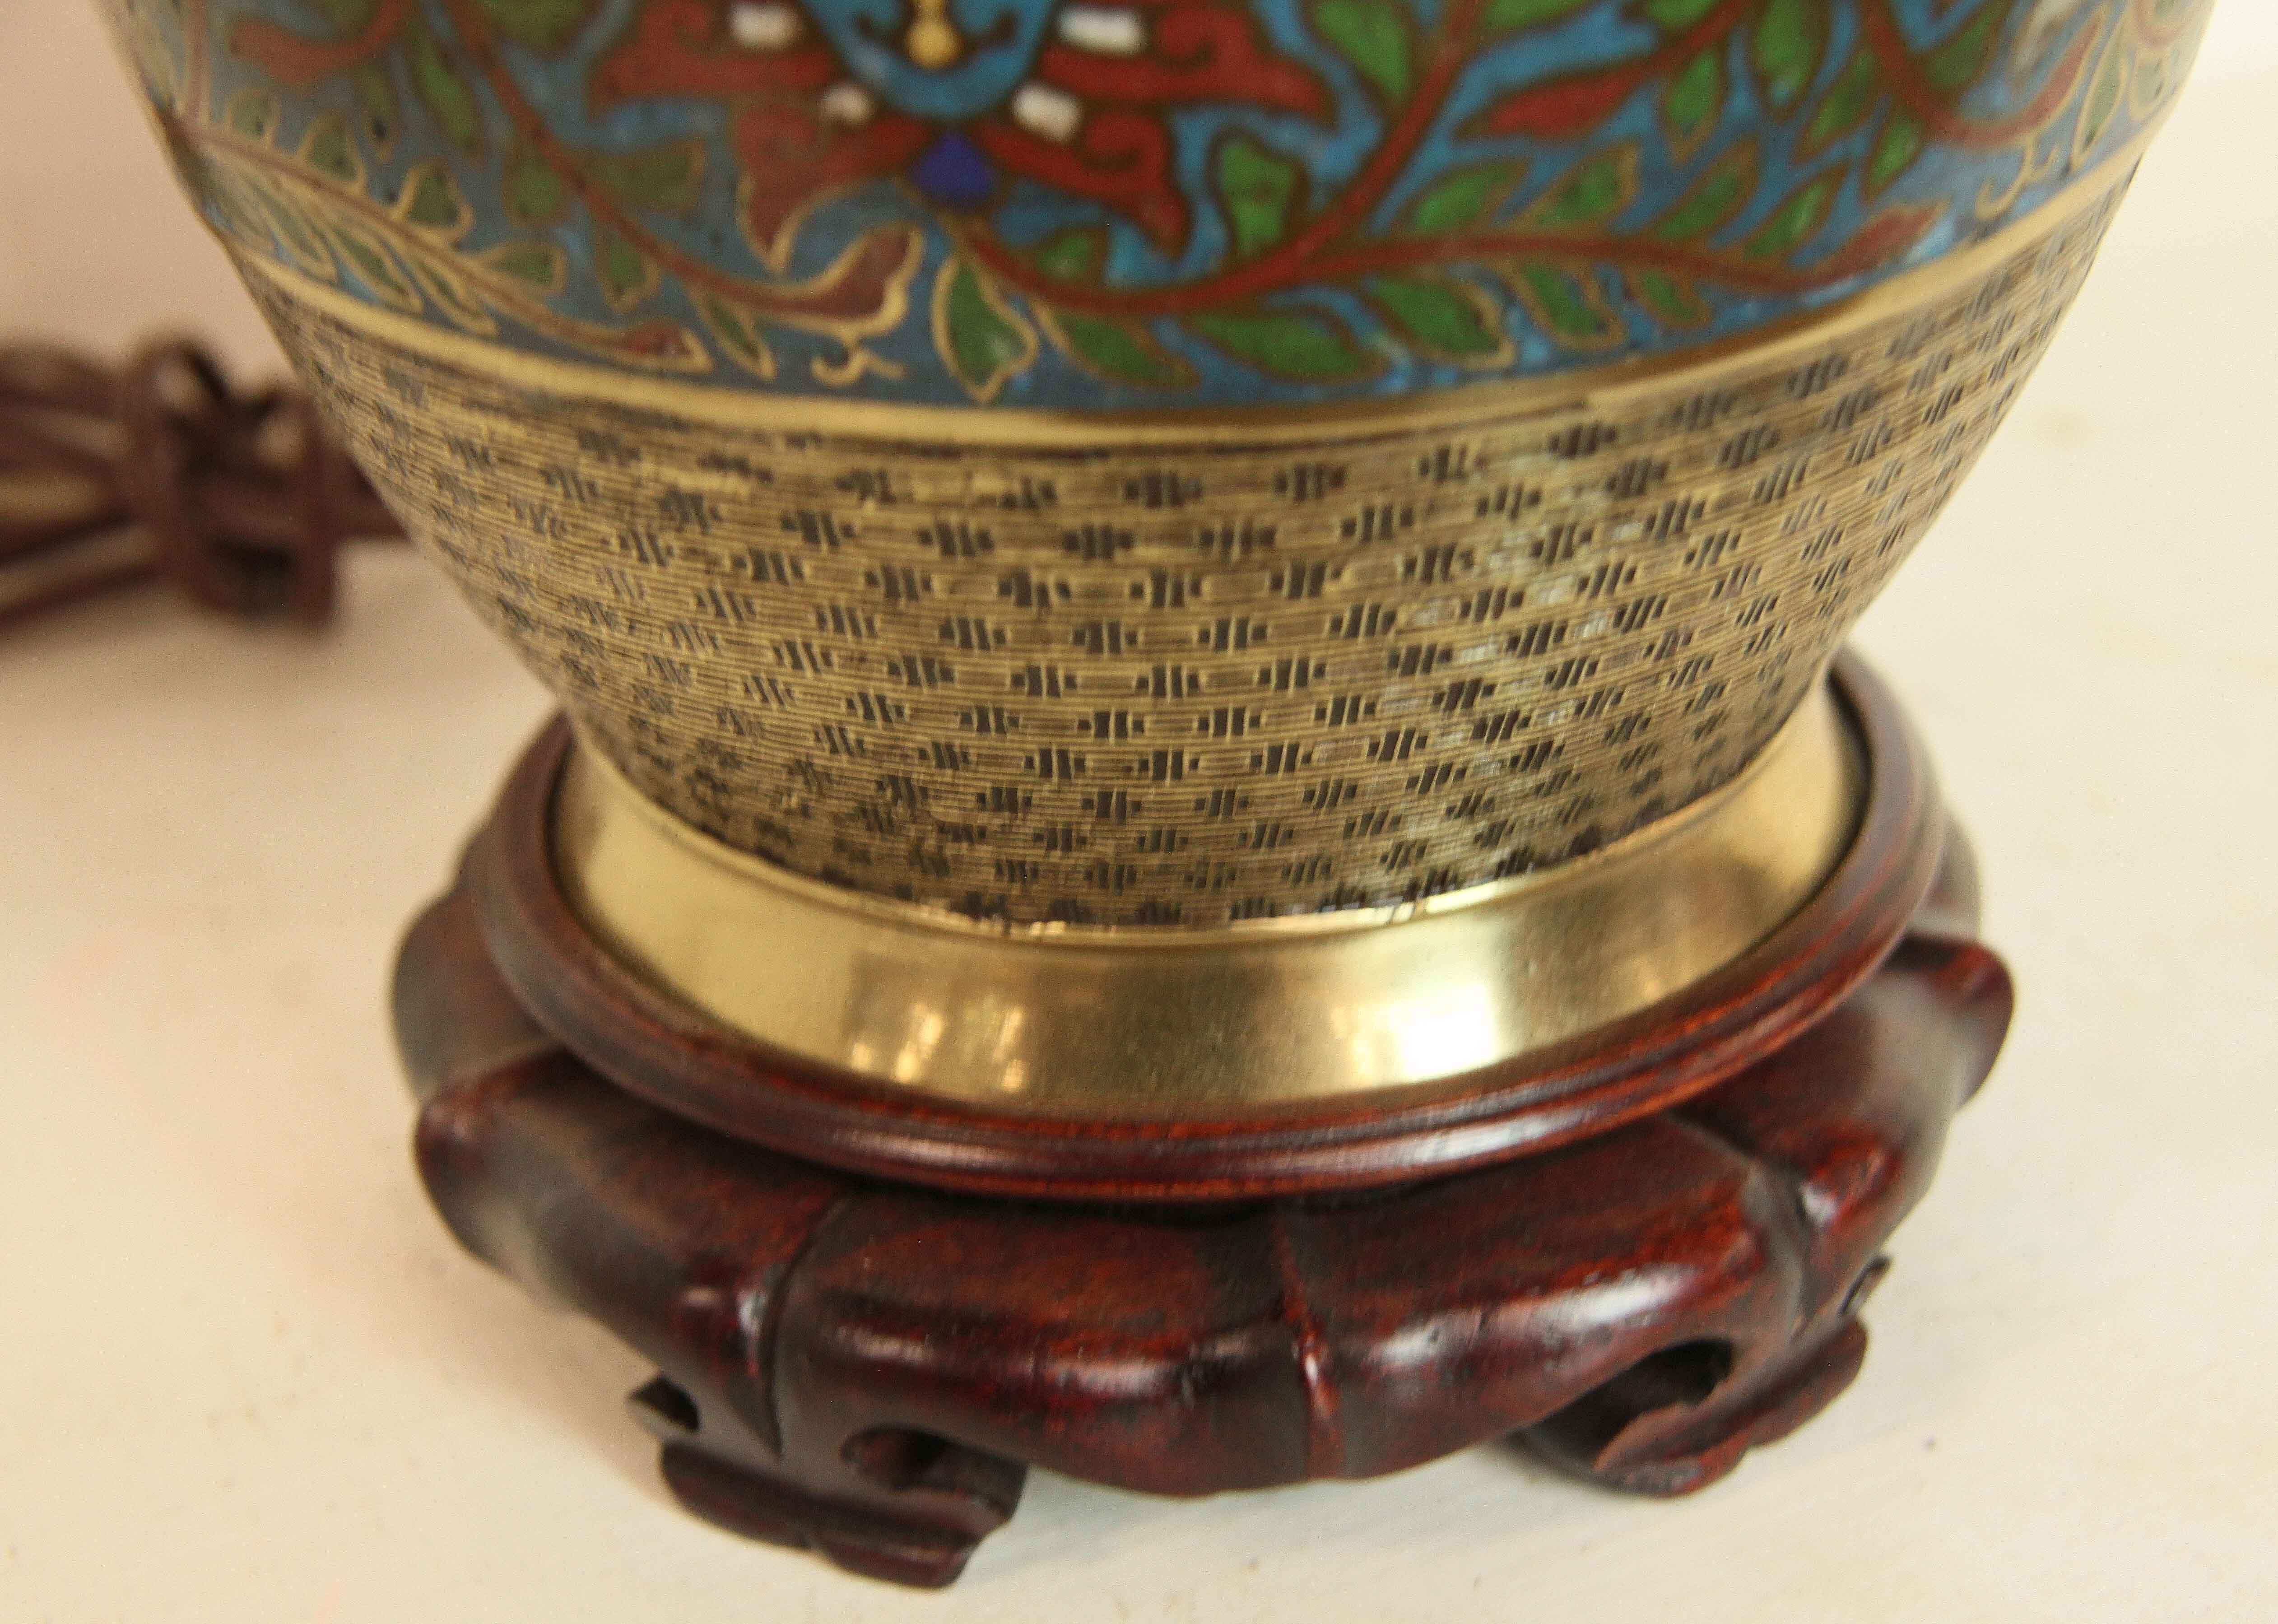 Japanese Champleve Vase Lamp For Sale 3